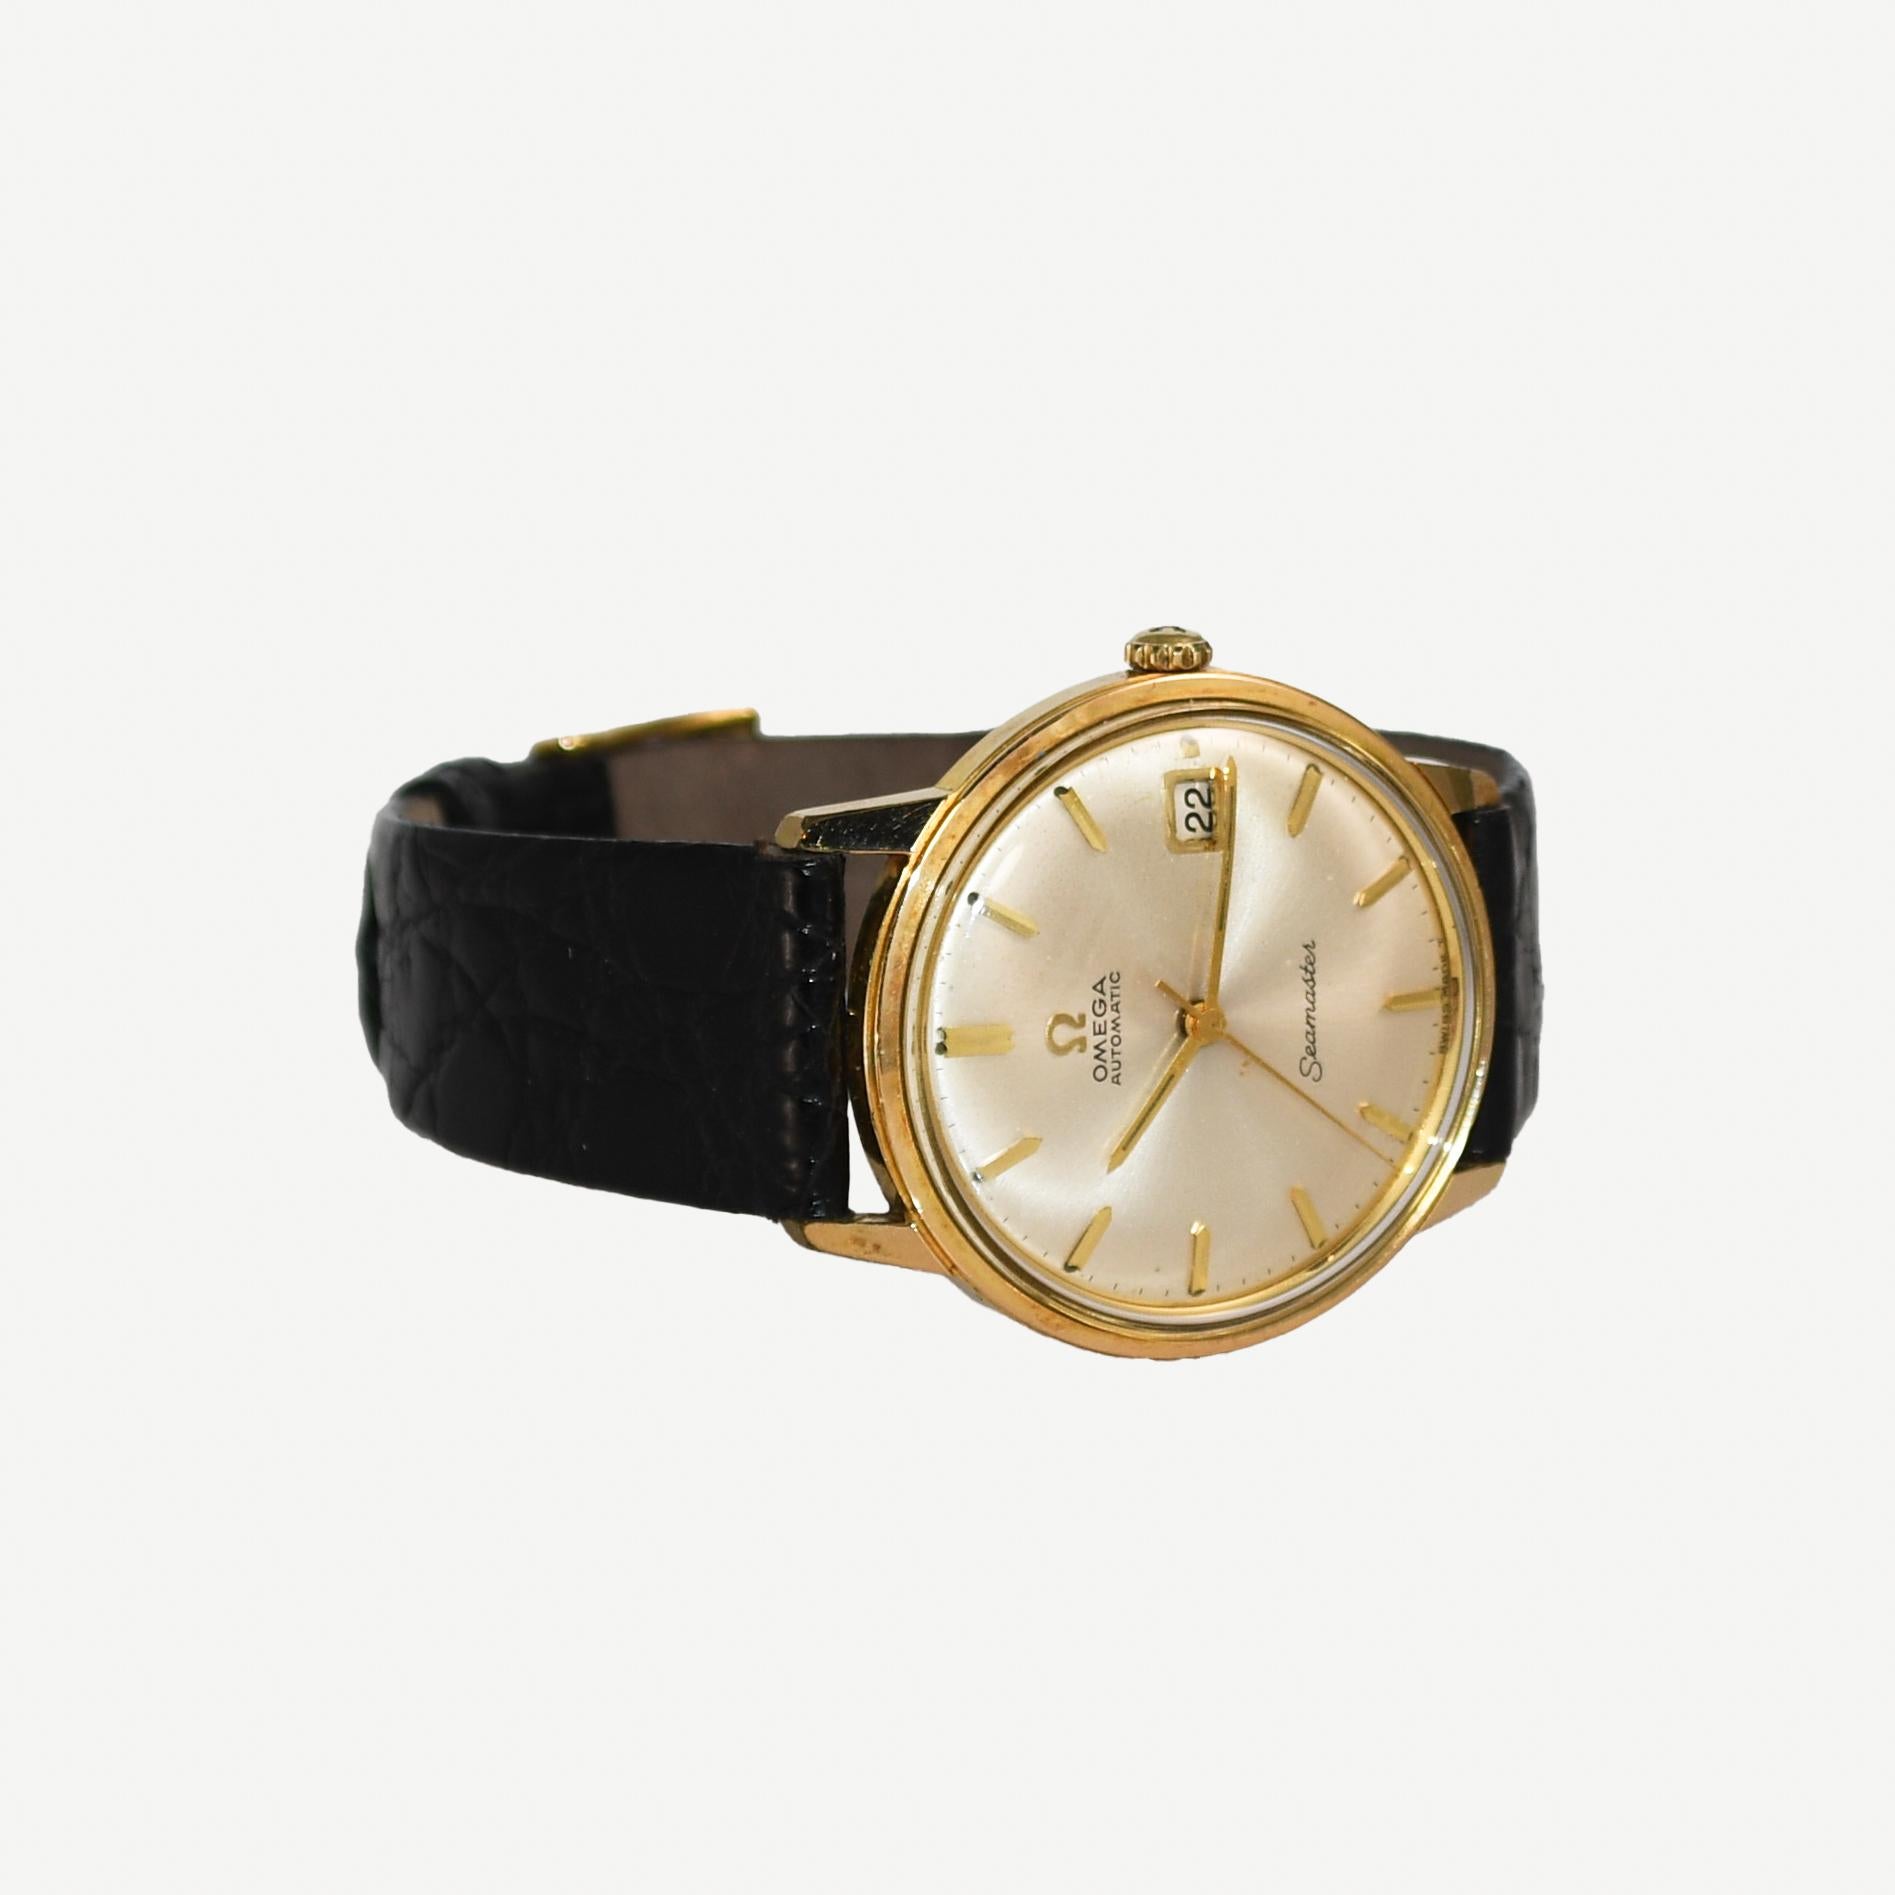 Men's Omega Seamaster Automatic wristwatch with date calendar display.
34mm case size. 24-jewel automatic movement, caliber 562.
Gold-plated upper case with stainless steel back.
Time tested by watch maker and keeps time. 
There is a small chip in